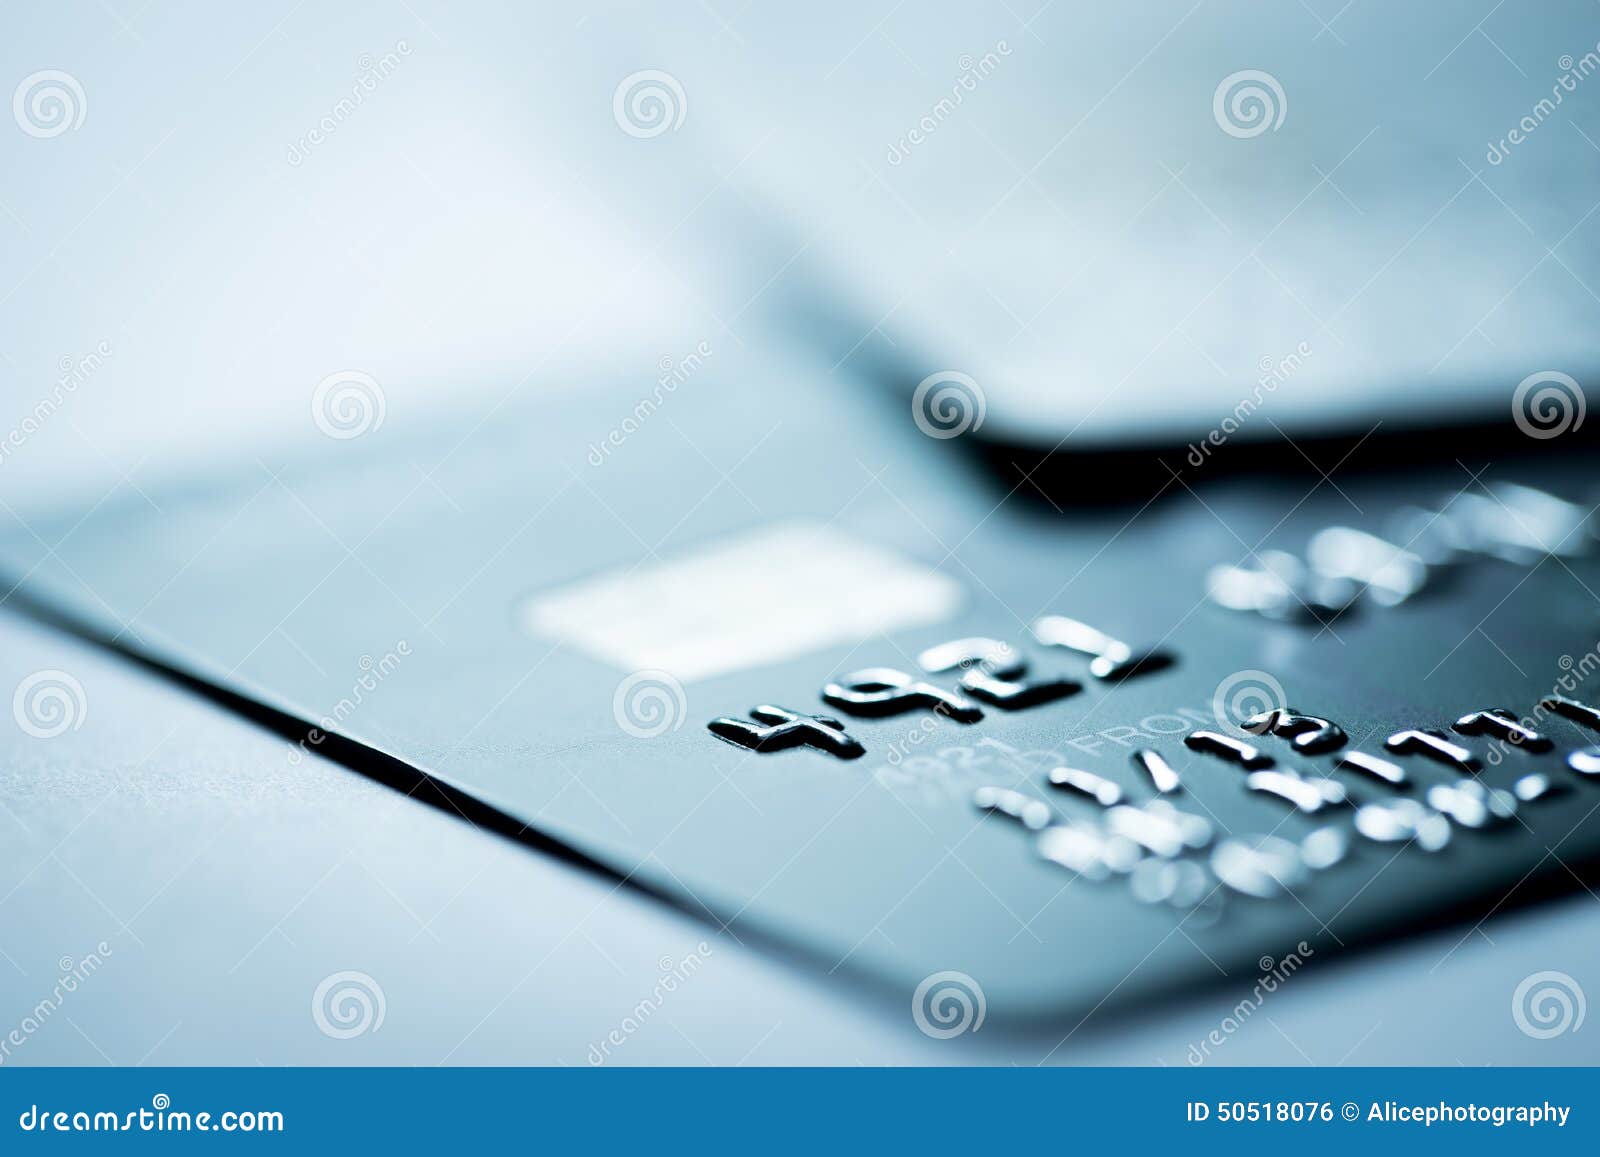 credit card payment, shopping online